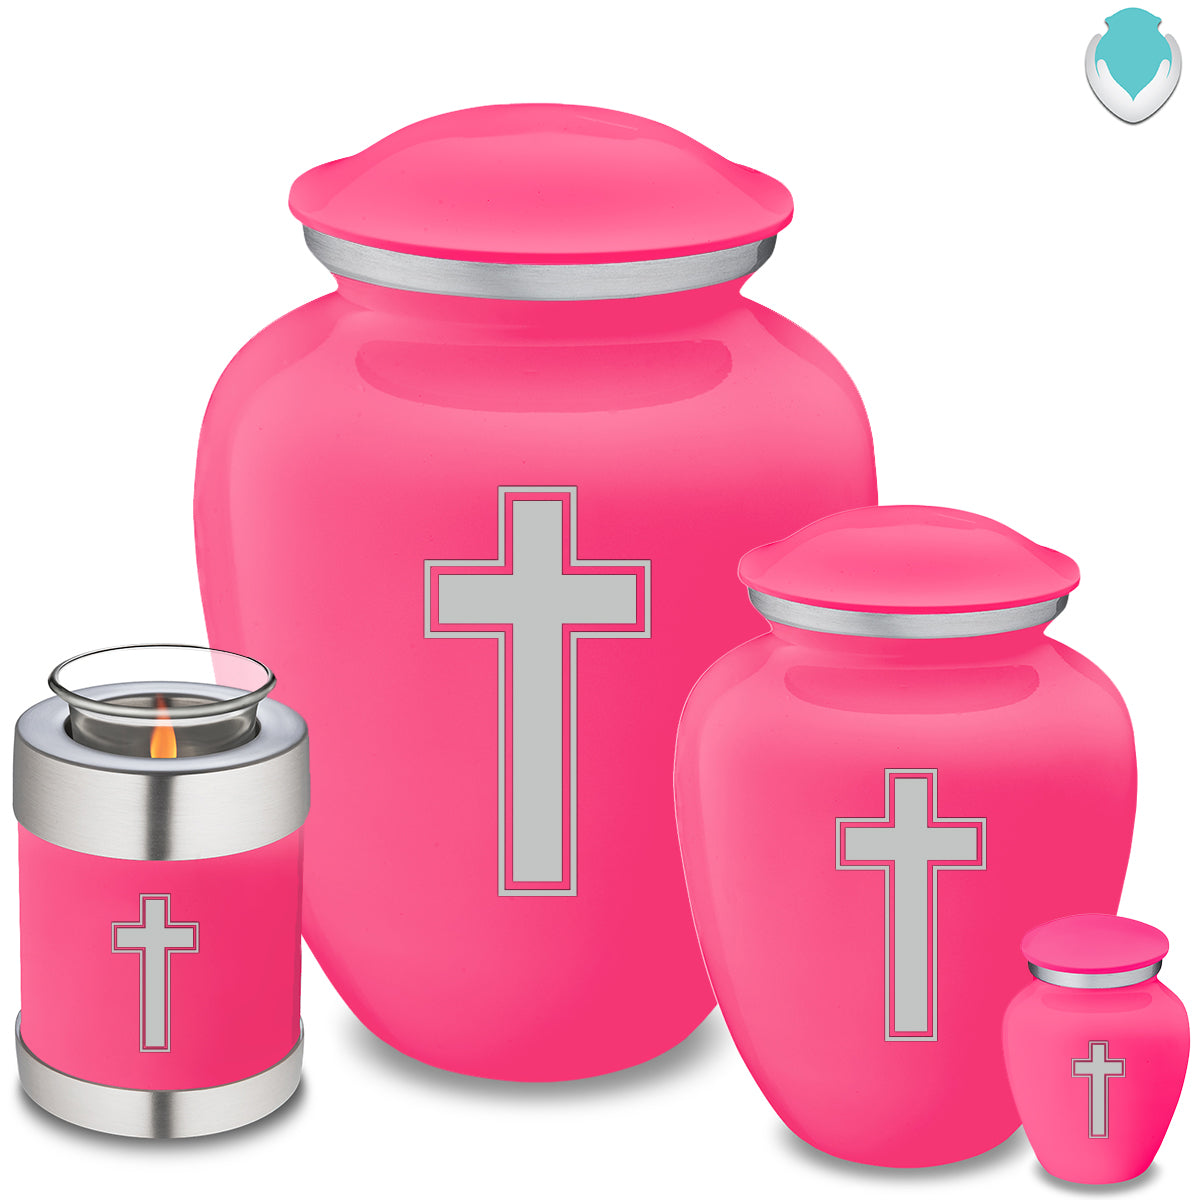 Candle Holder Embrace Bright Pink Simple Cross Cremation Urn